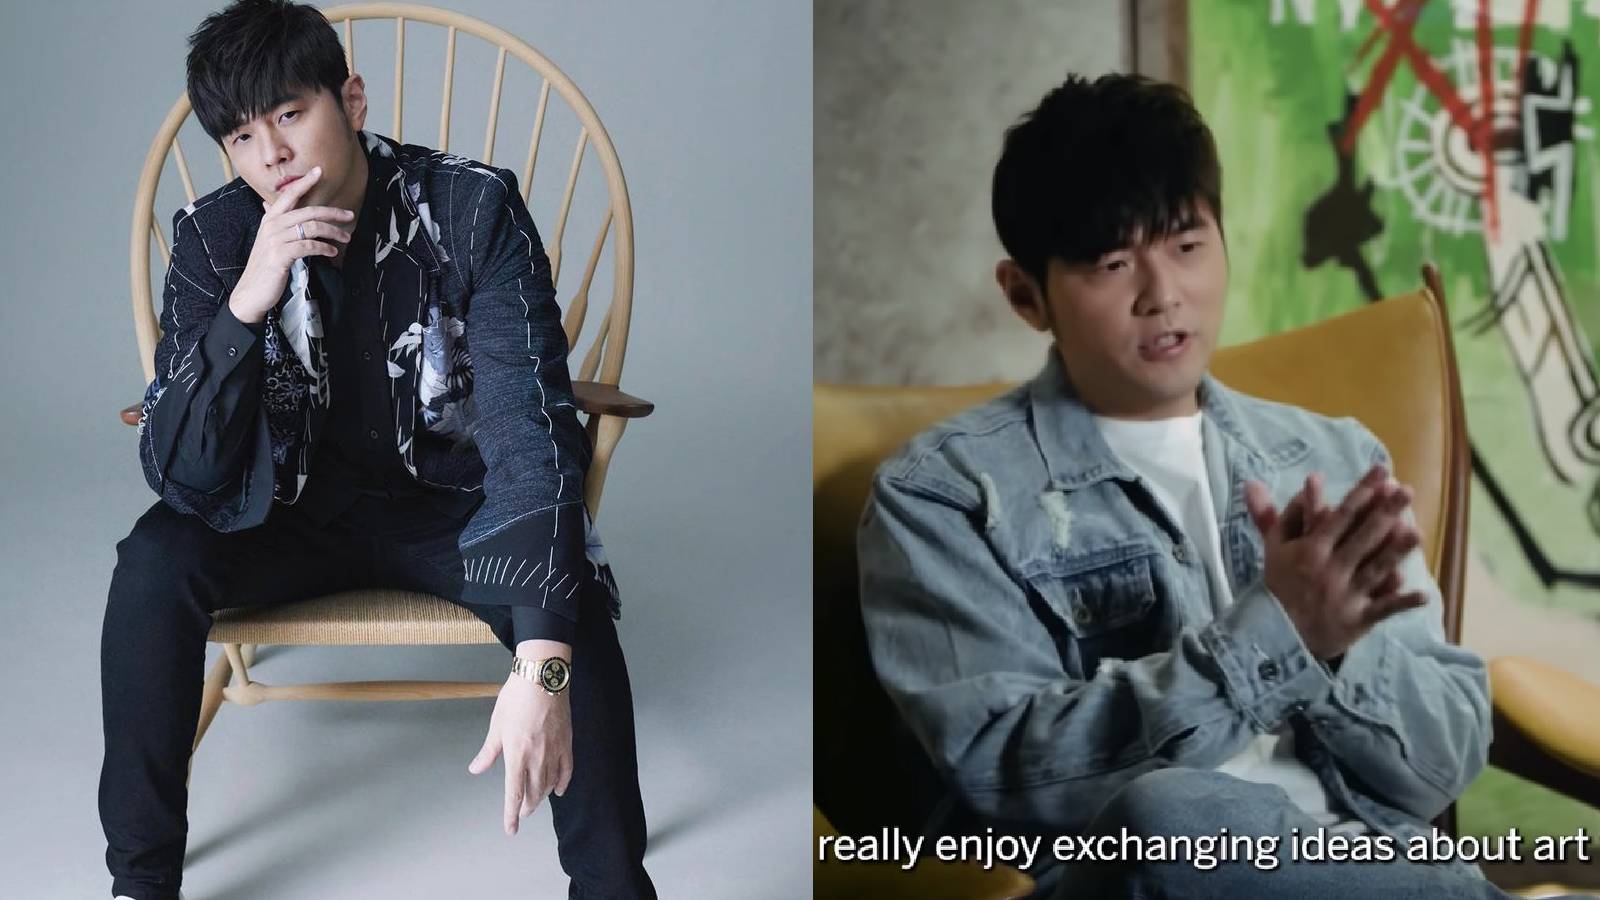 Jay Chou Stuns Netizens By Speaking In Fluent English In This Vid Talking About His Art Collection